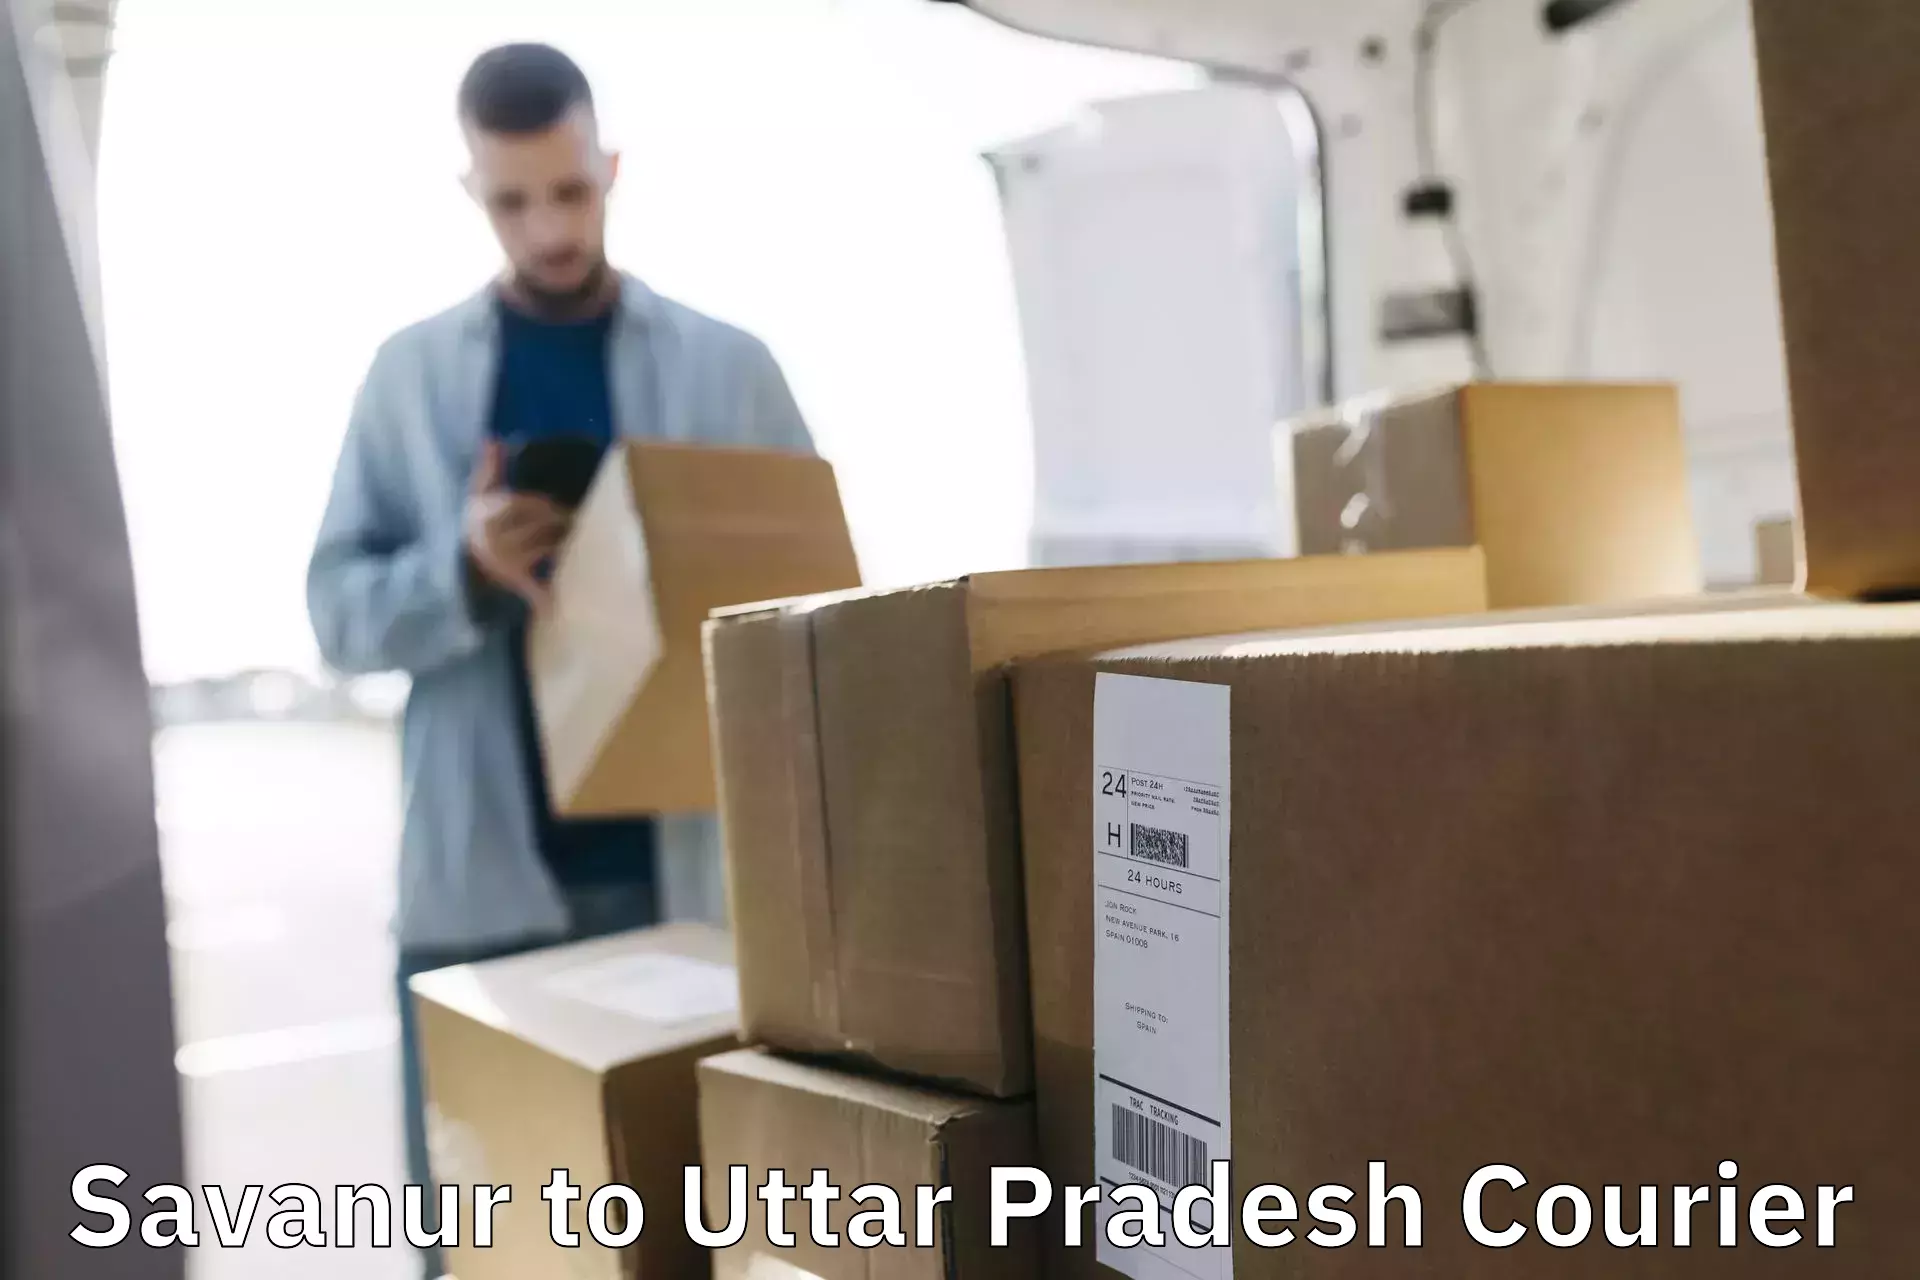 Domestic courier Savanur to Agra